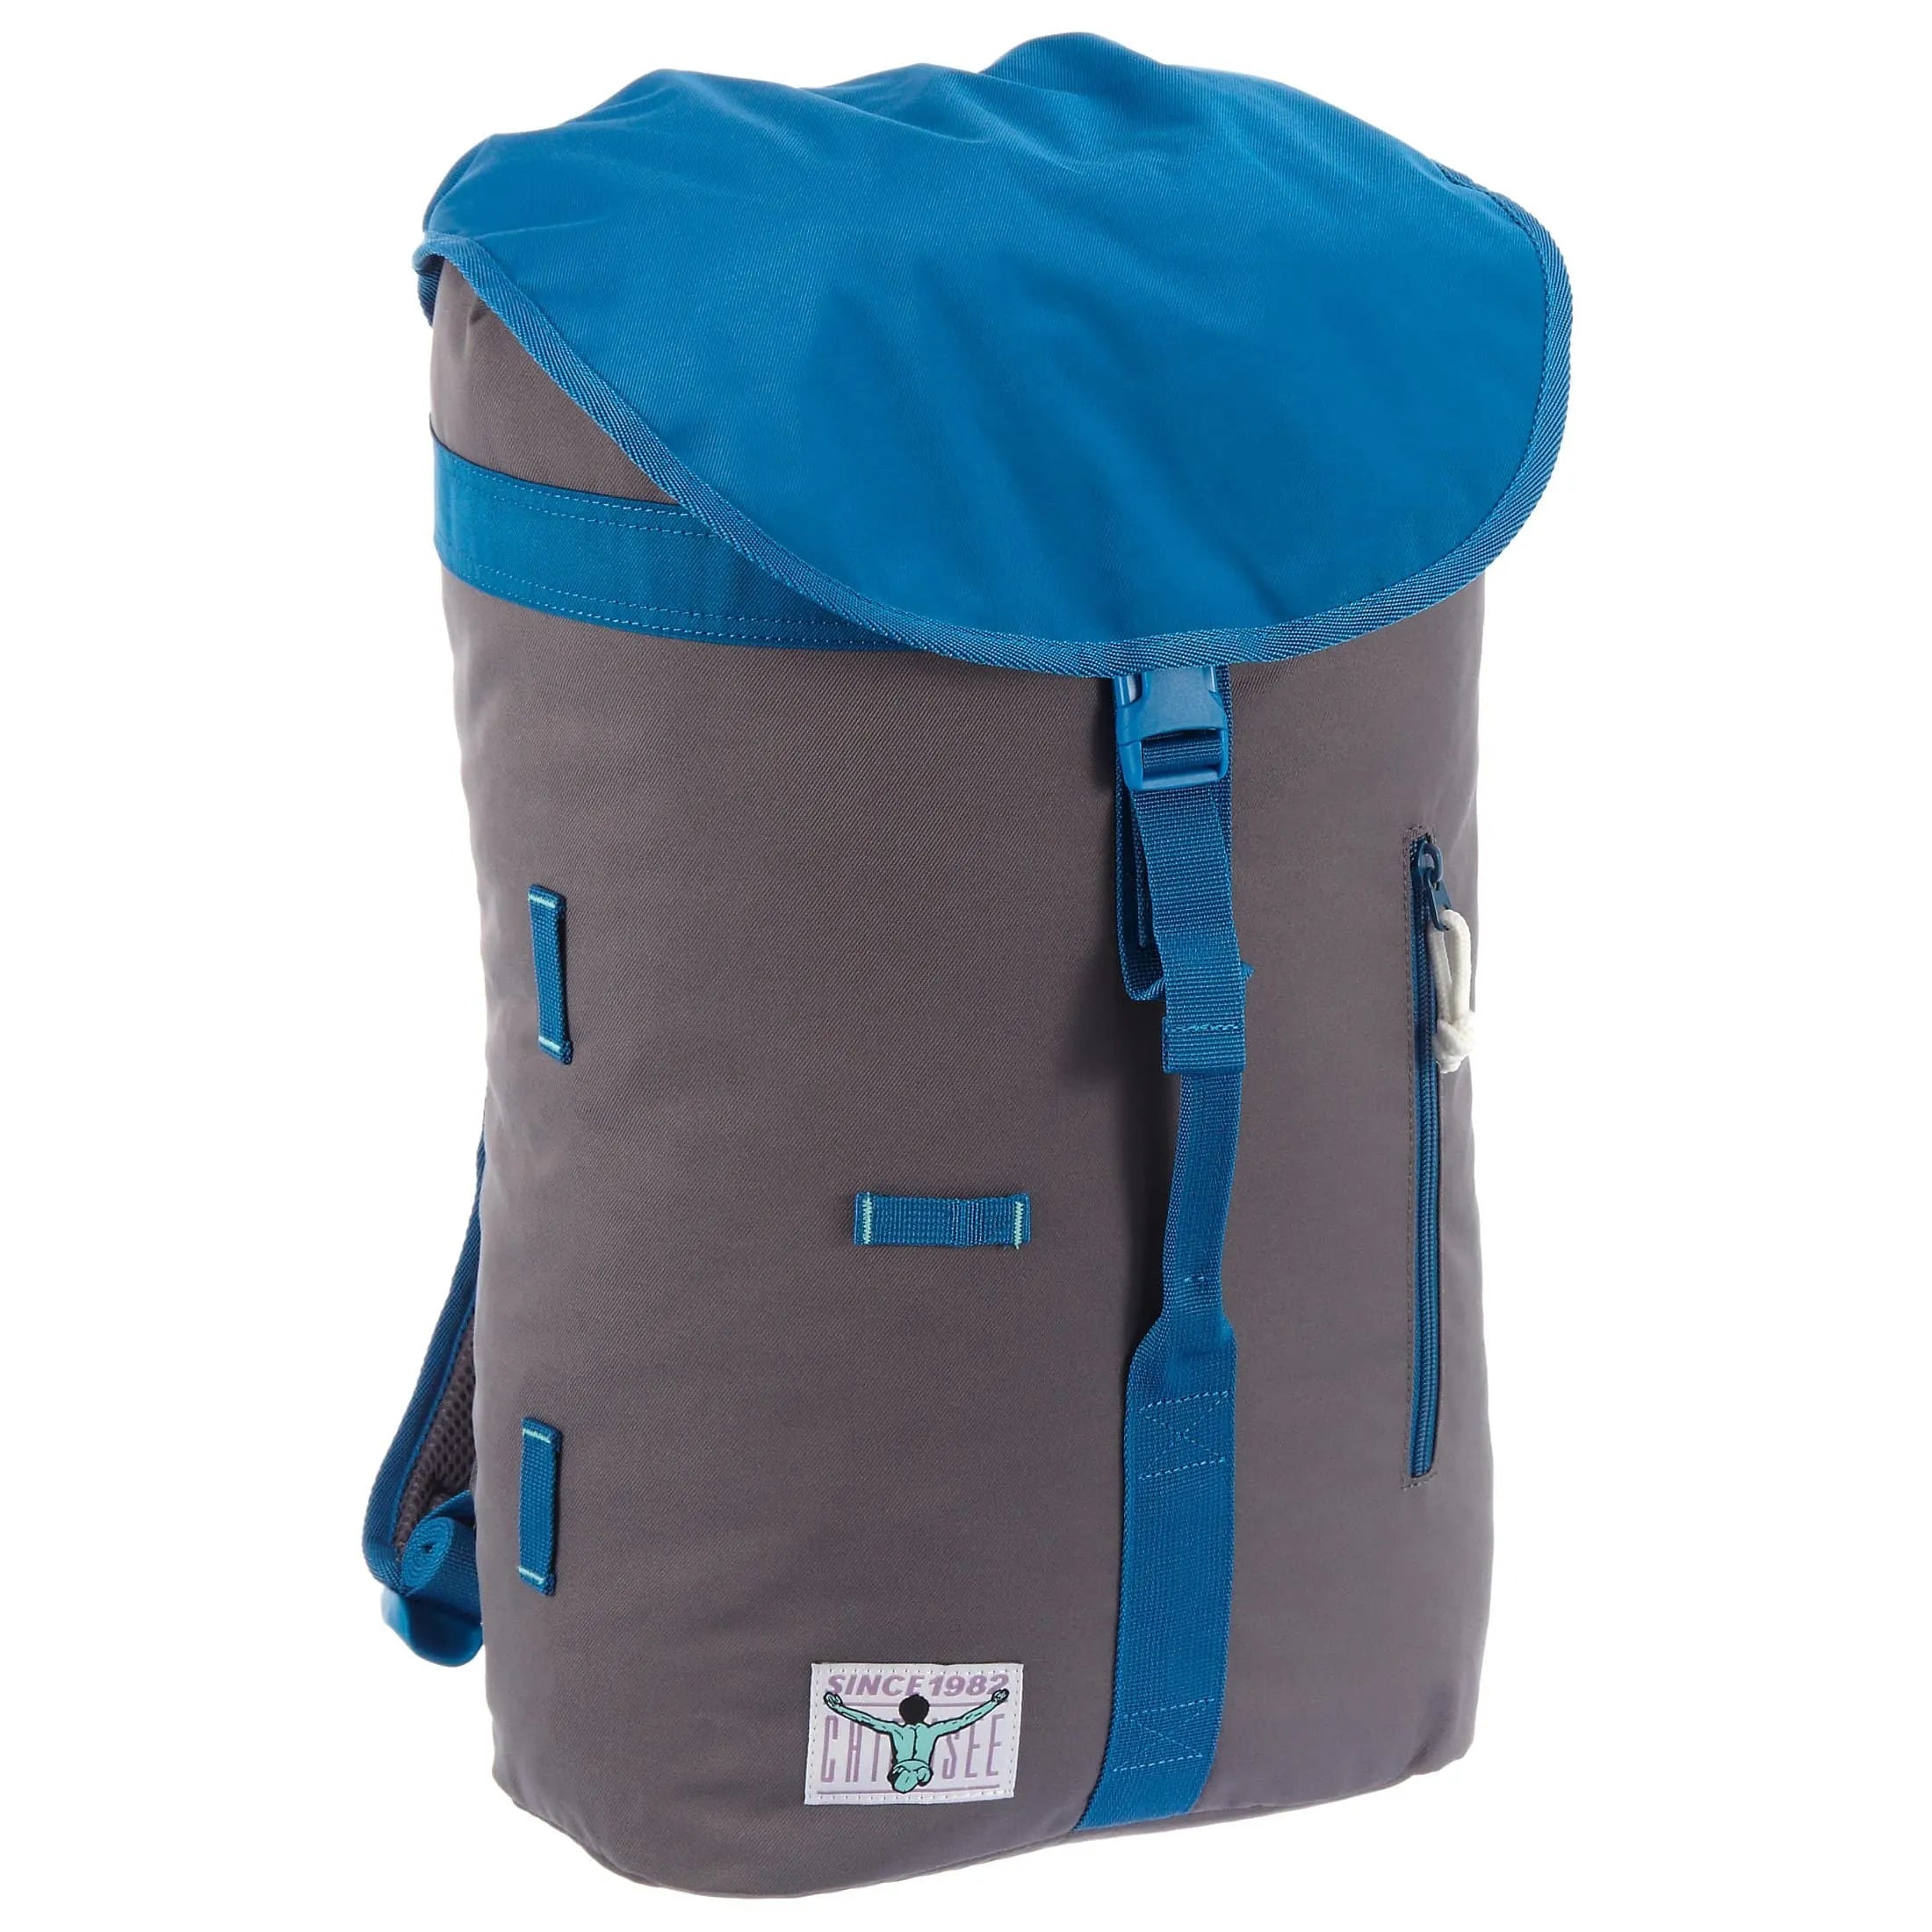 Chiemsee Urban Explorer Oslo backpack with laptop compartment 45 cm - bossa nova